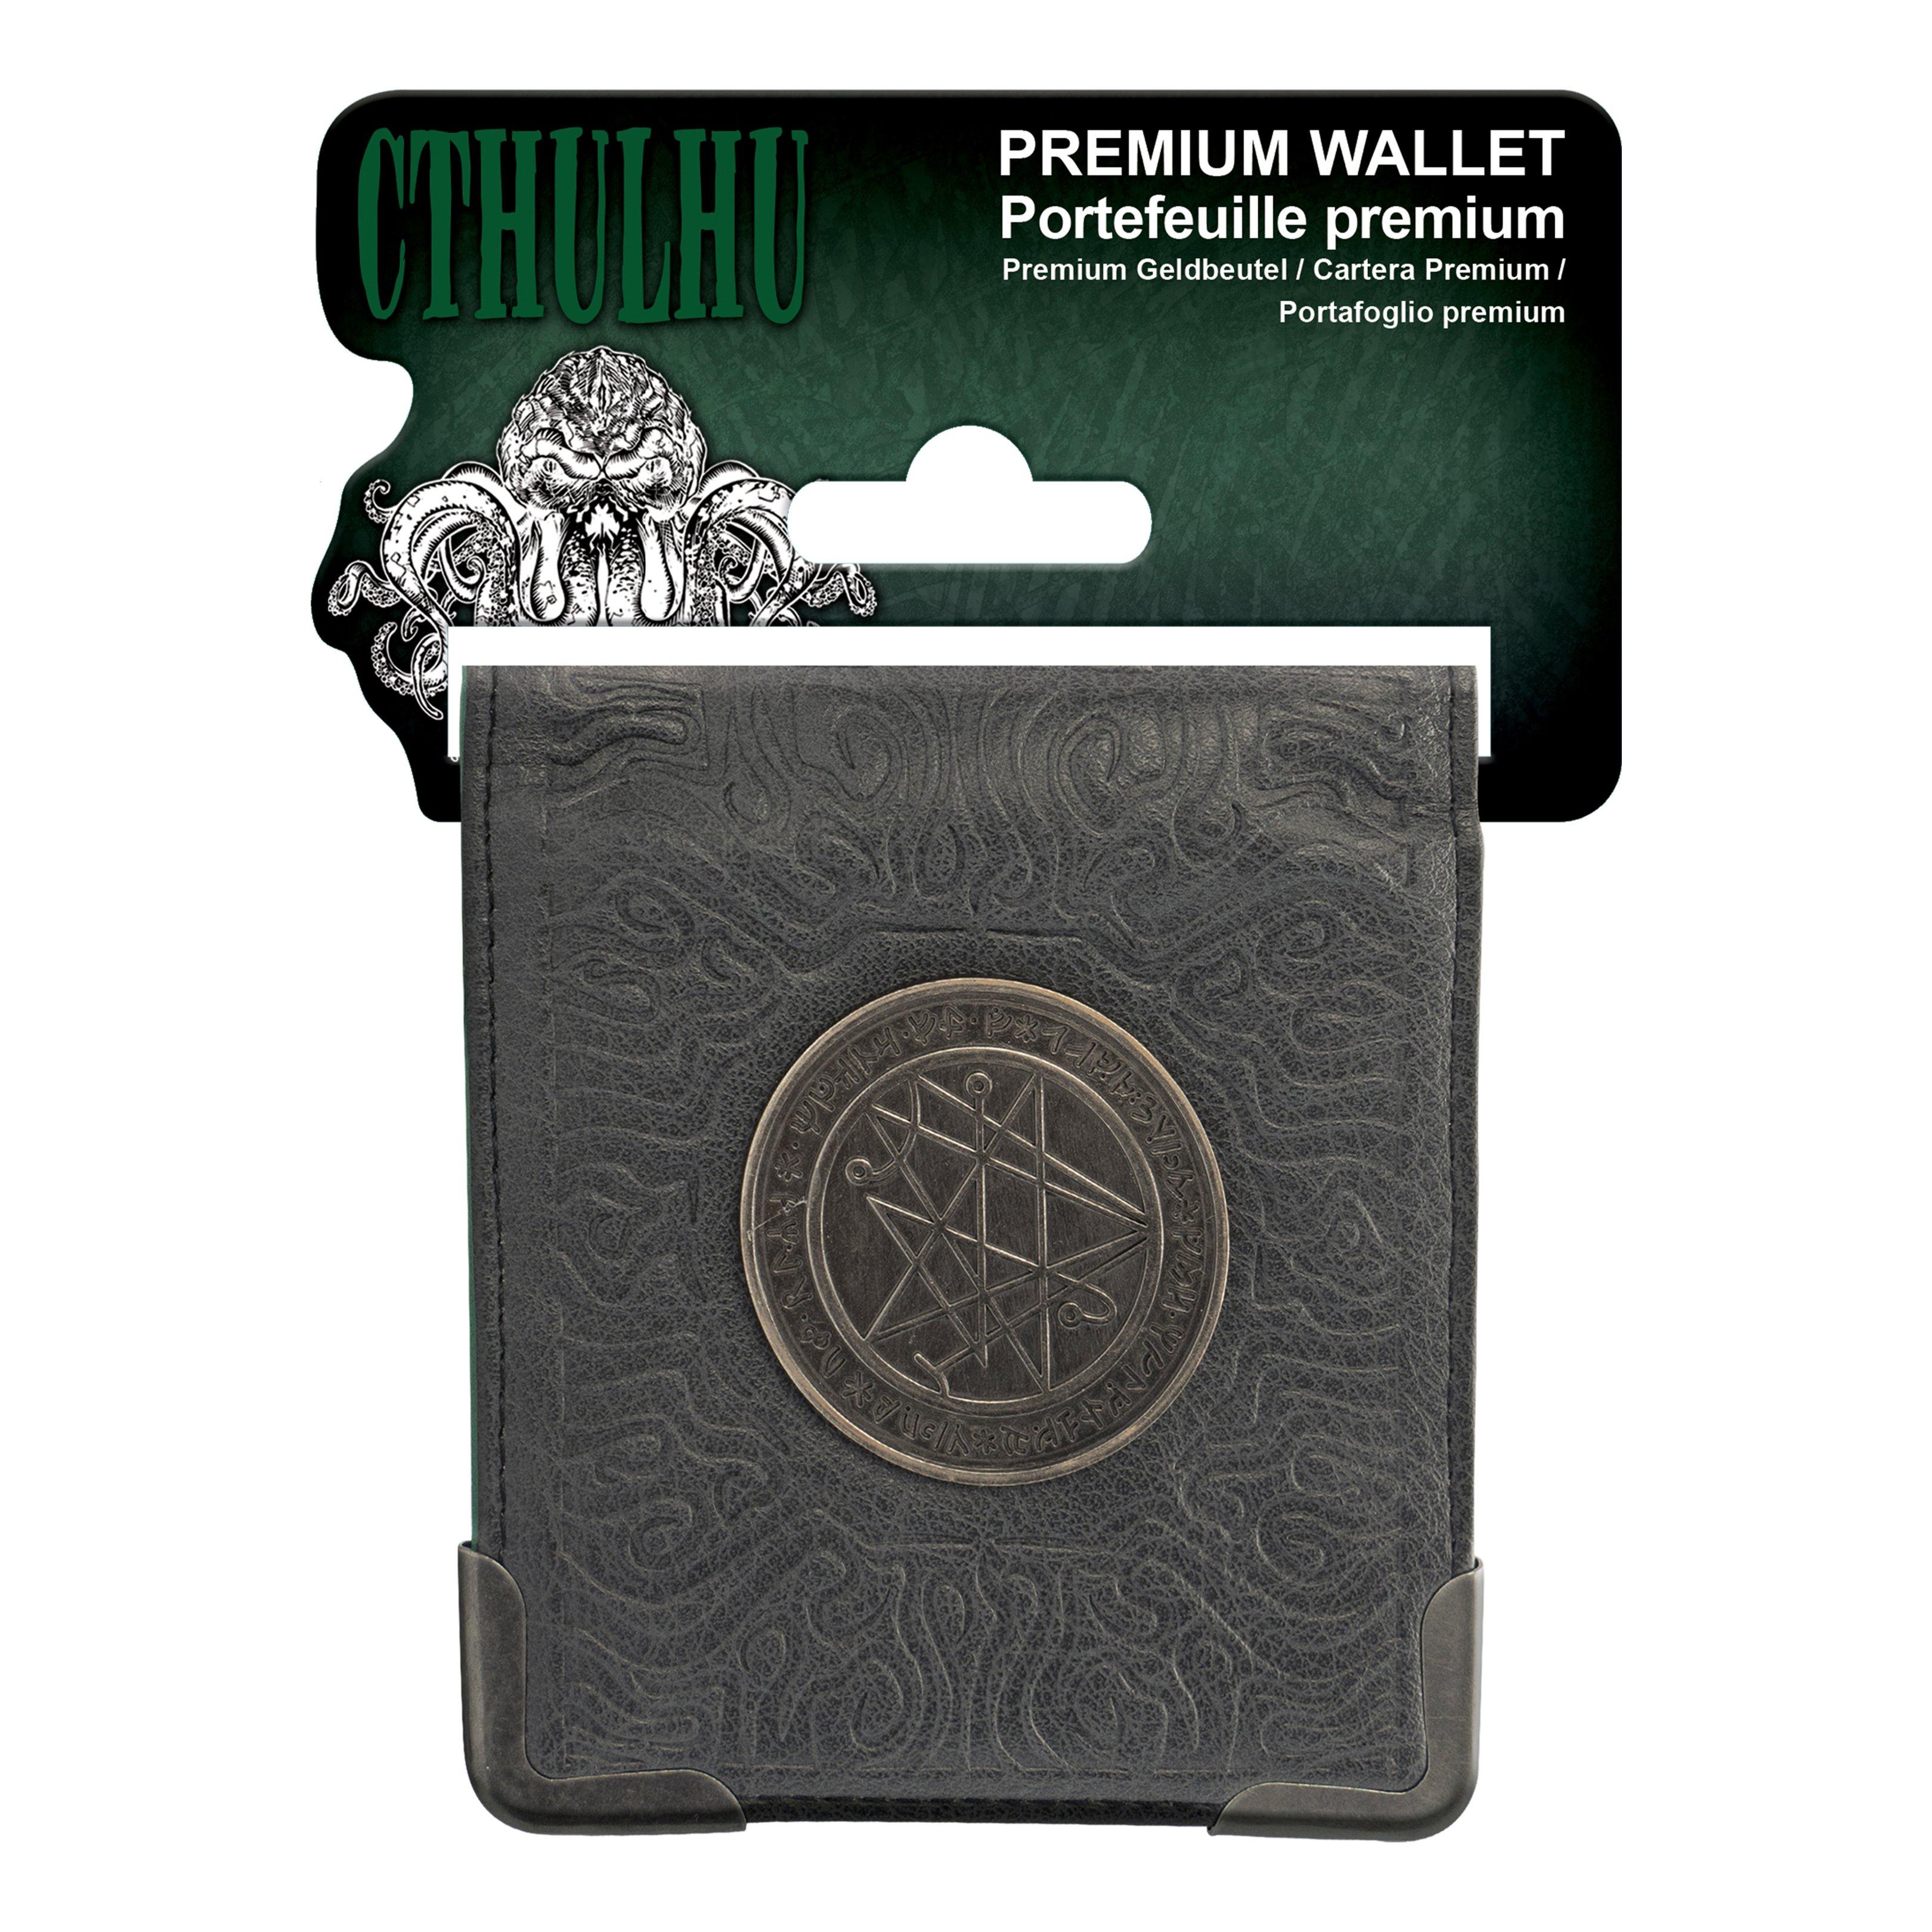 ABYstyle Cthulhu Premium Wallet